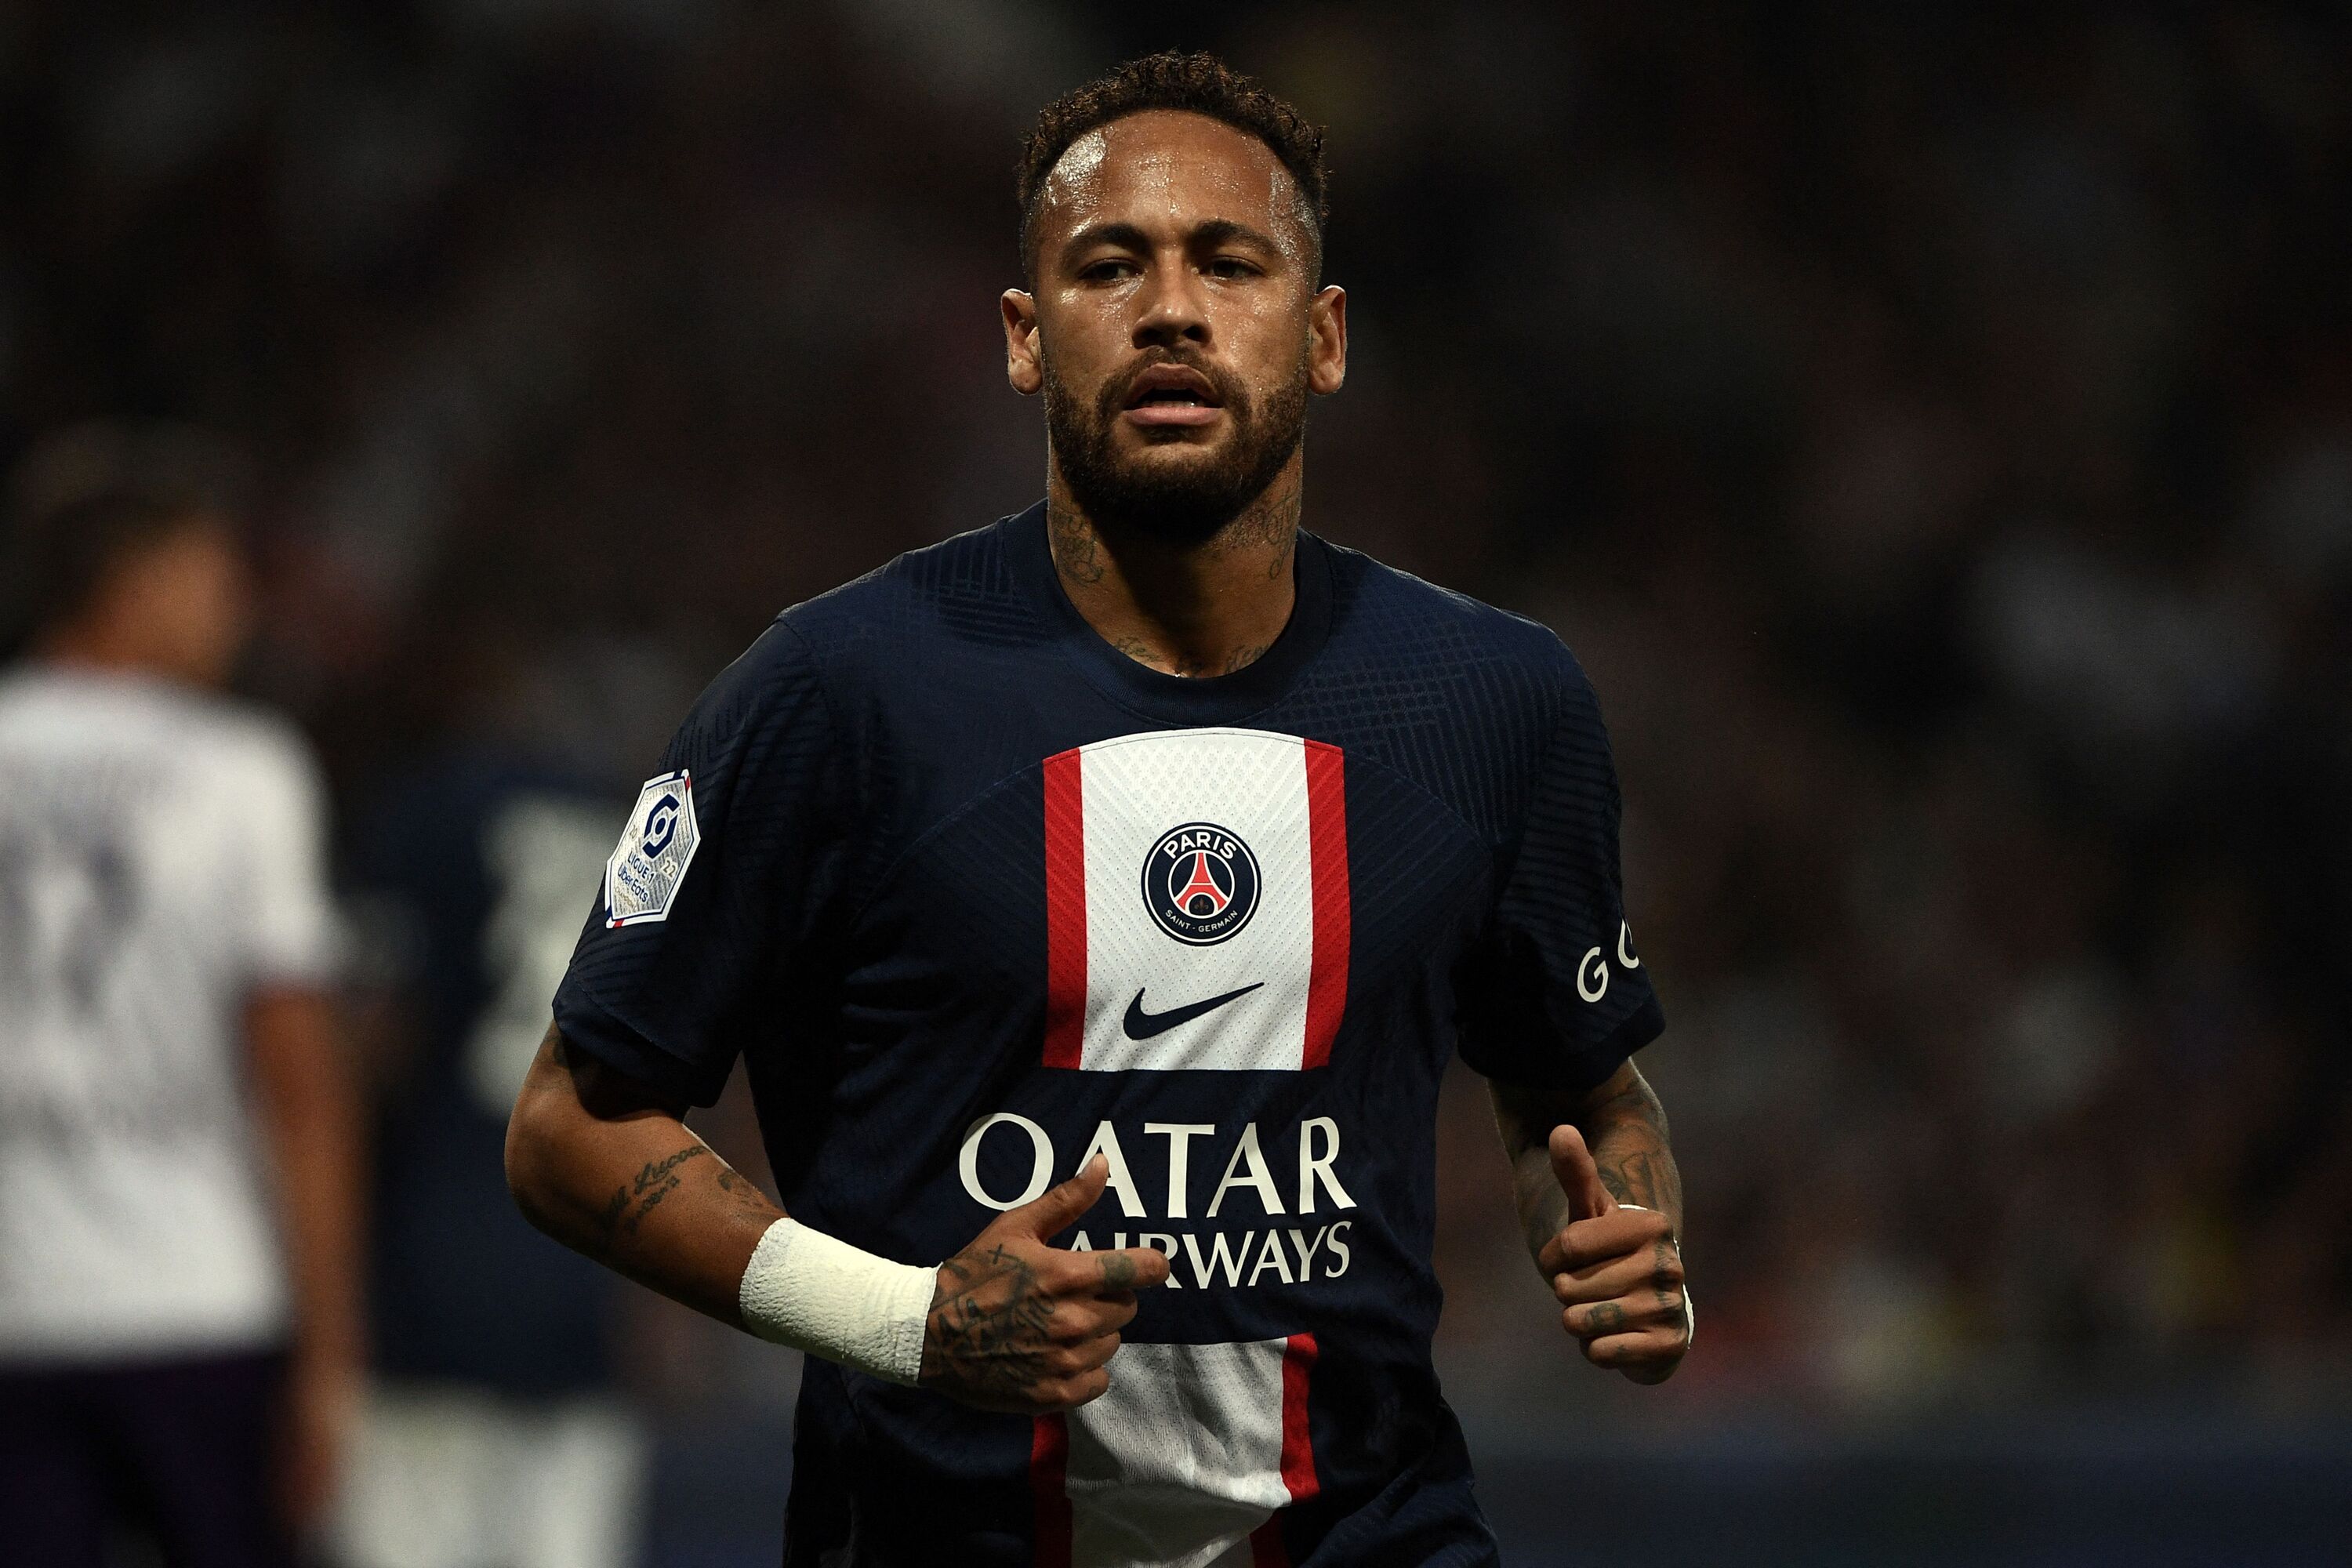 Luis Campos Reveals the Truth About the Neymar Exit Rumors